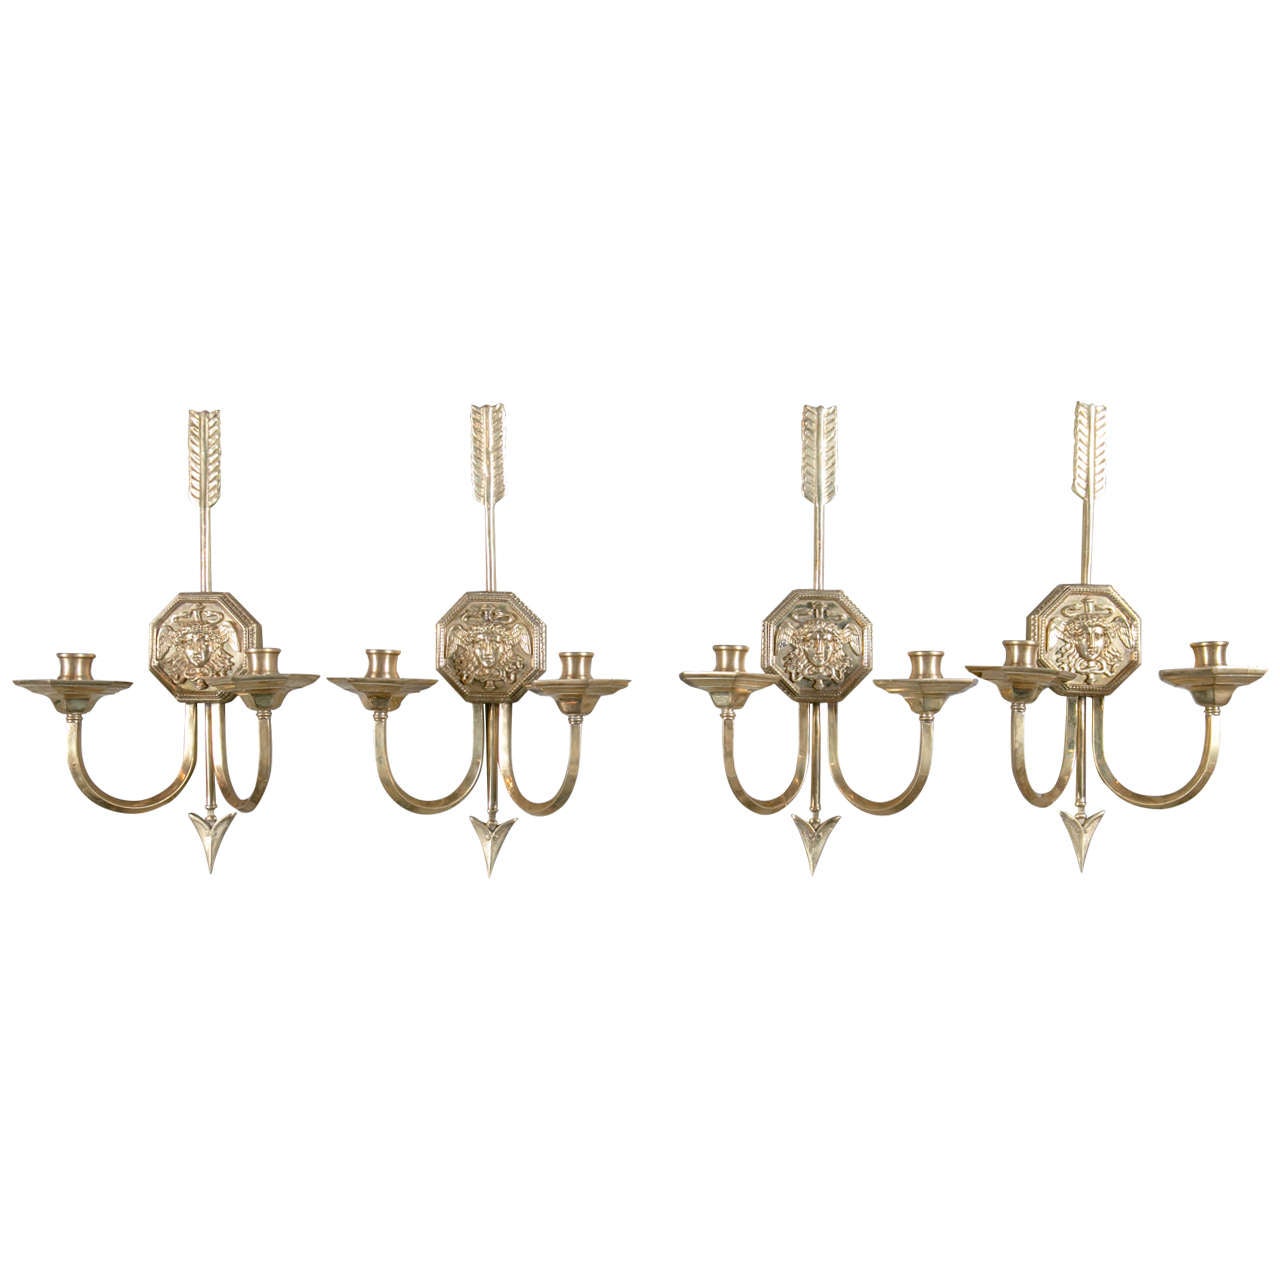 Pair of Empire Style Caldwell Sconces For Sale